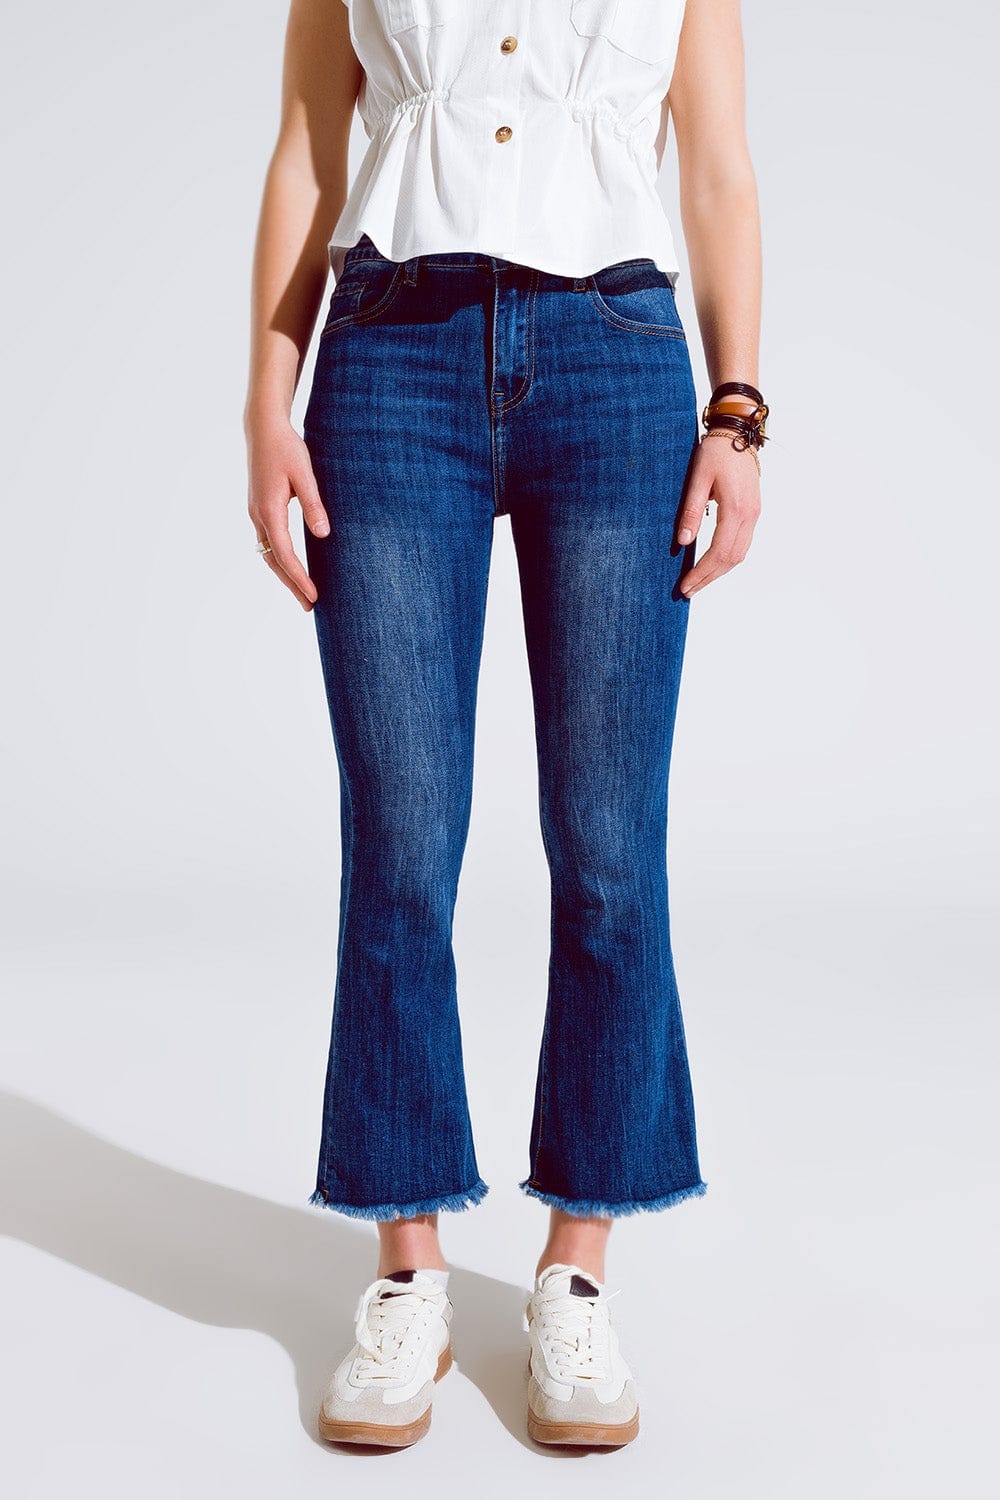 Q2 Women's Jean Flared Skinny Jeans With Raw Hem Edge In Mid Wash